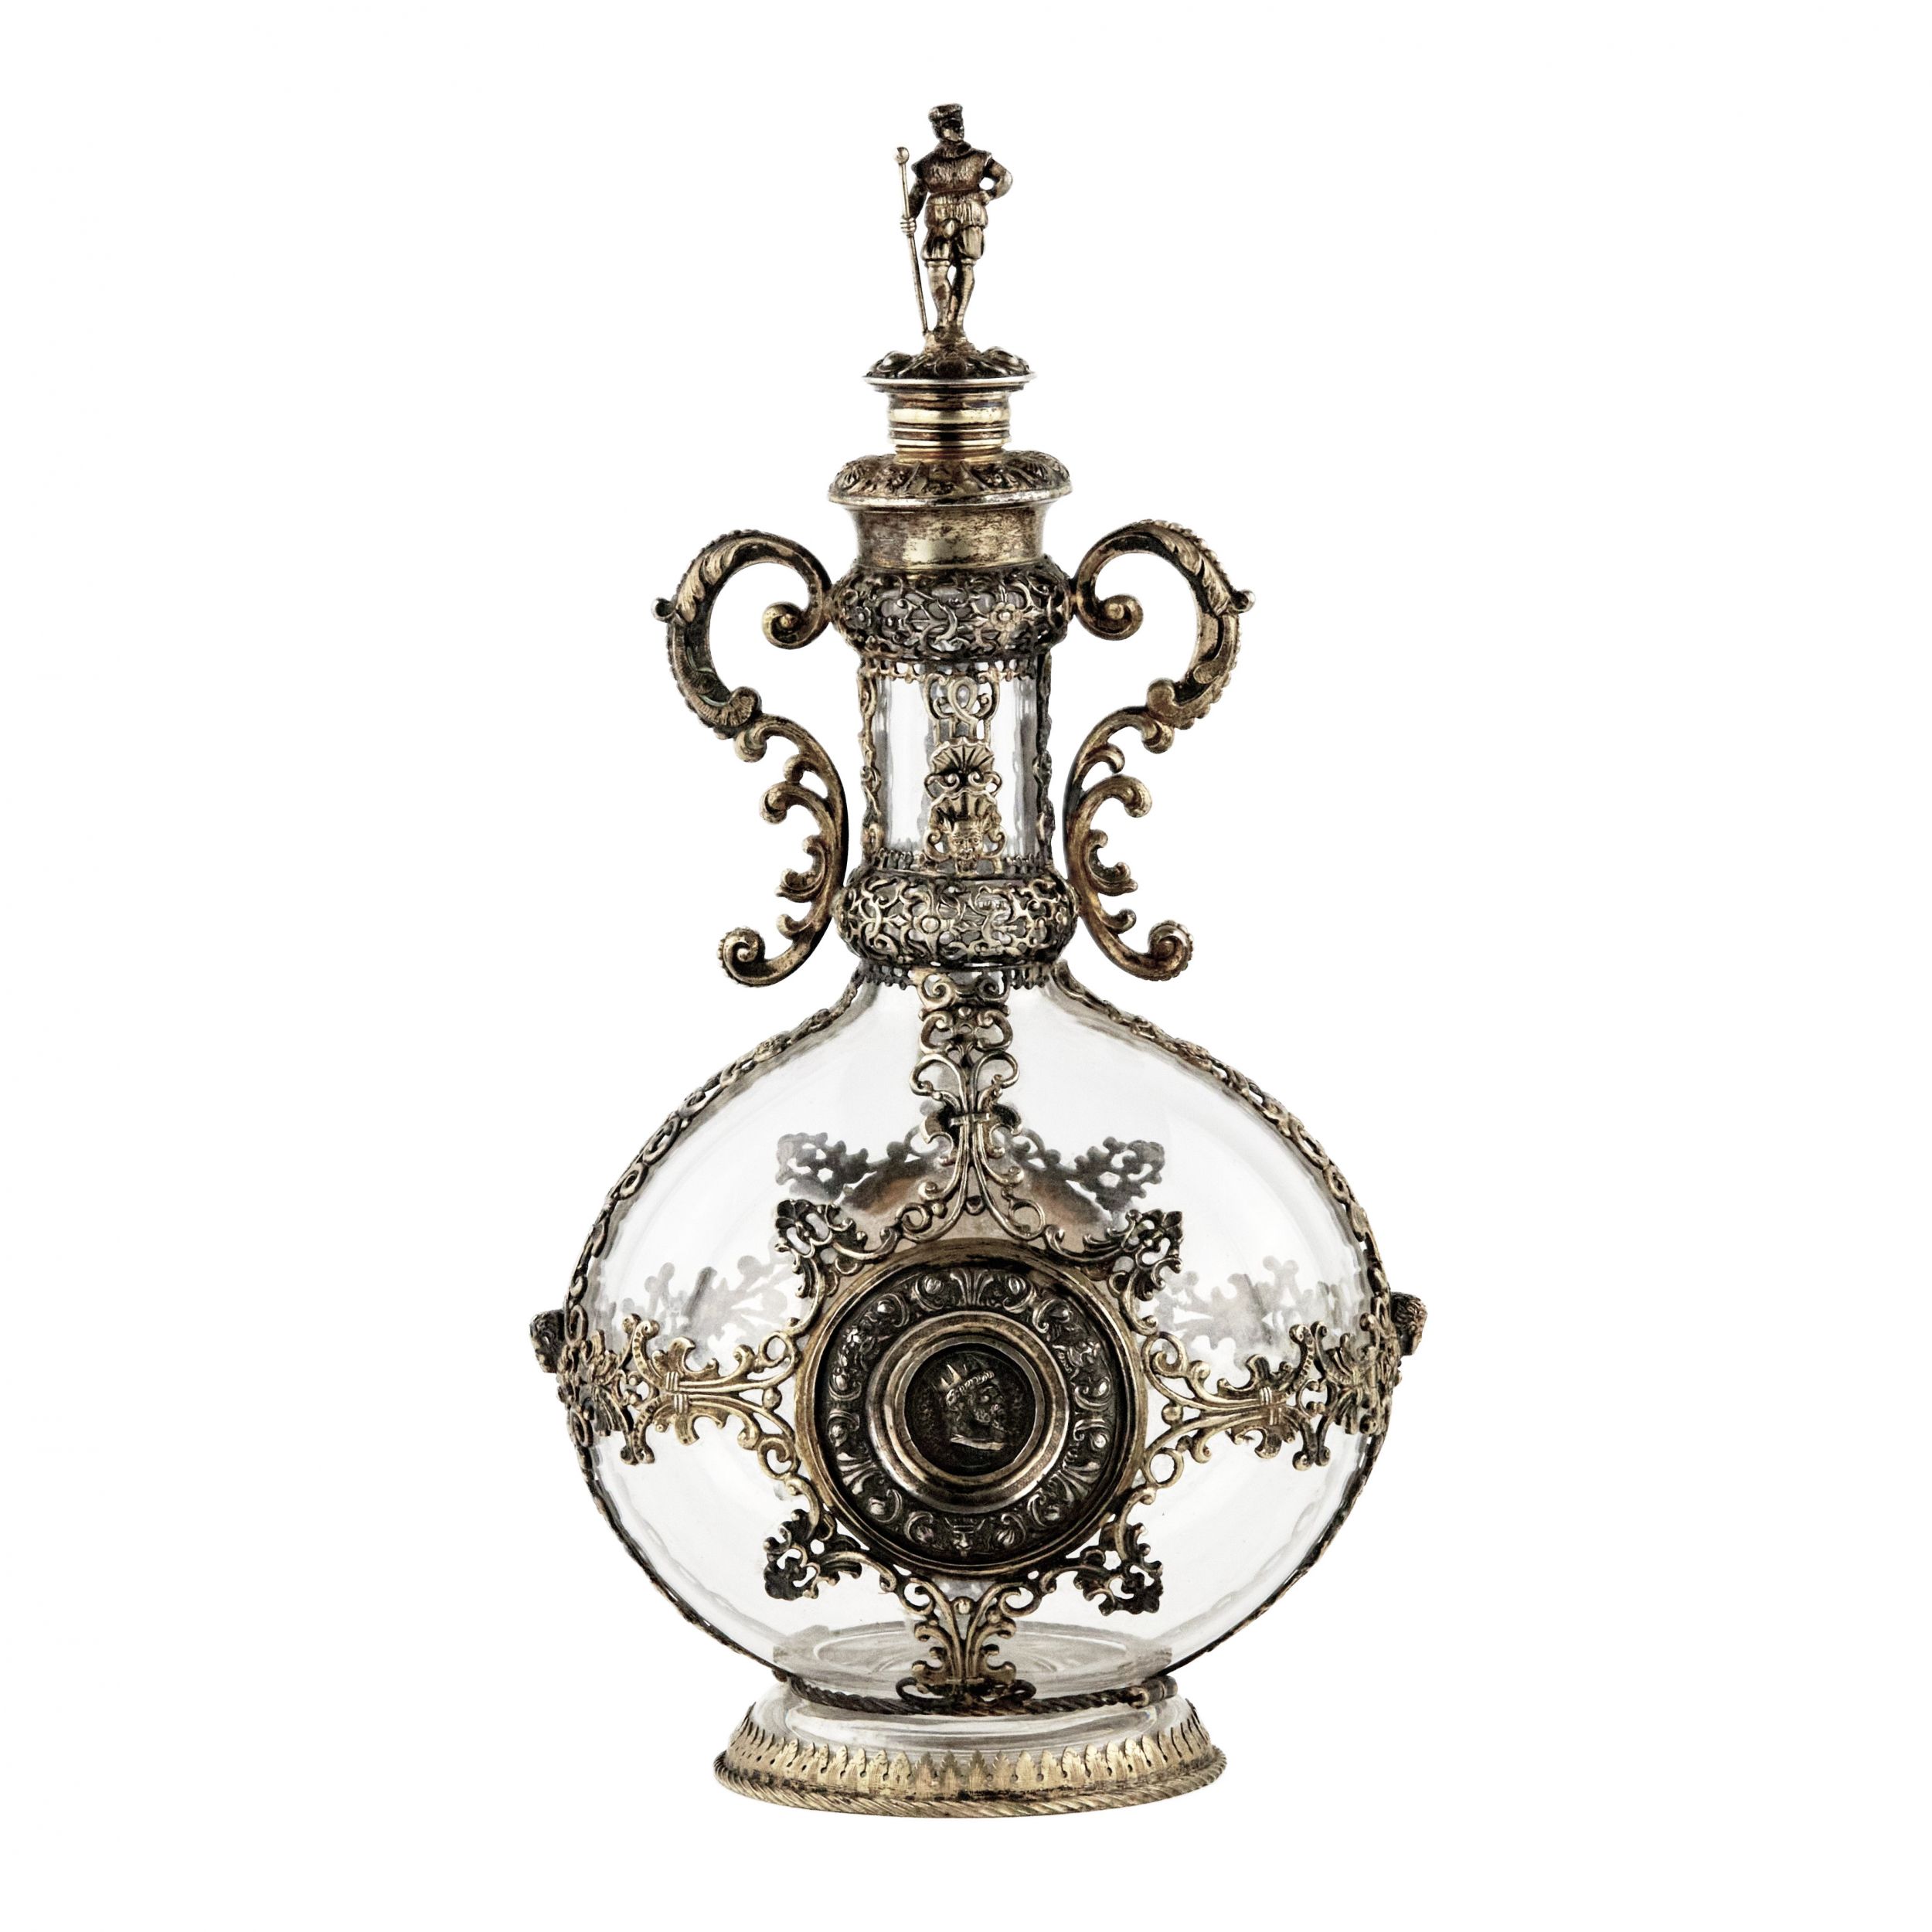 Graceful-glass-decanter-in-openwork-silver-Neo-Renaissance-period-Germany-19th-century-